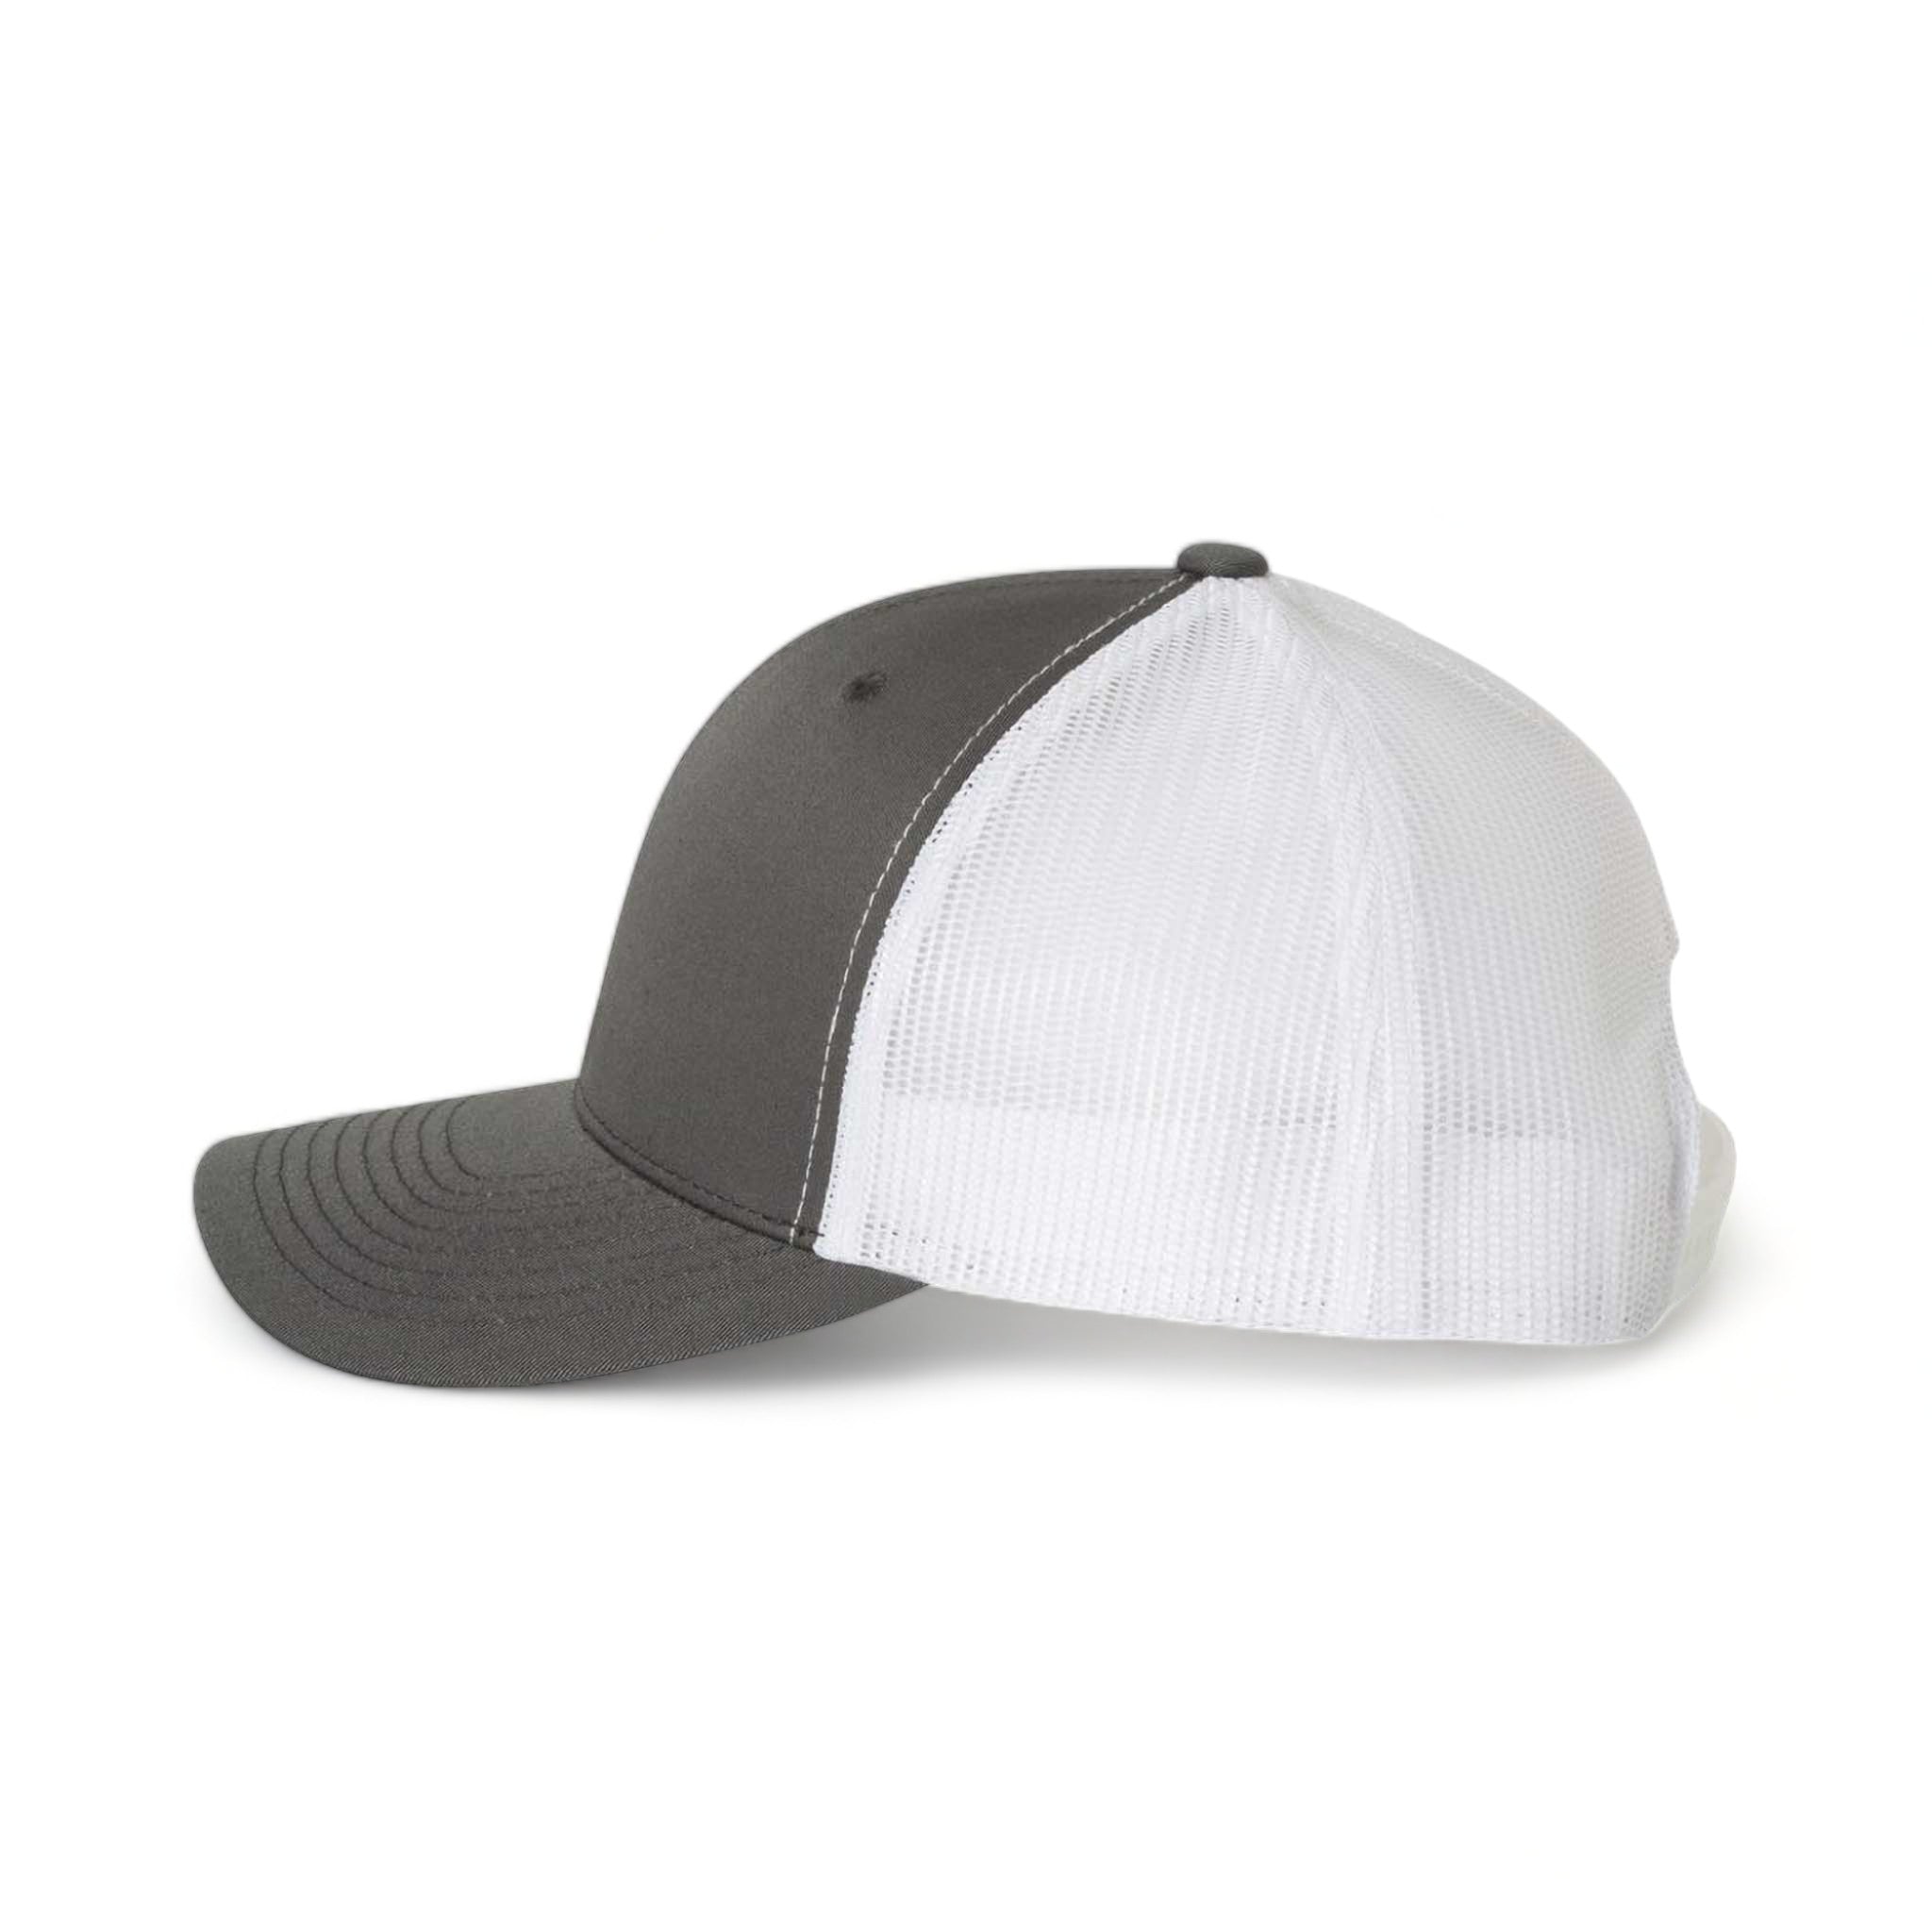 Side view of YP Classics 6606 custom hat in charcoal and white